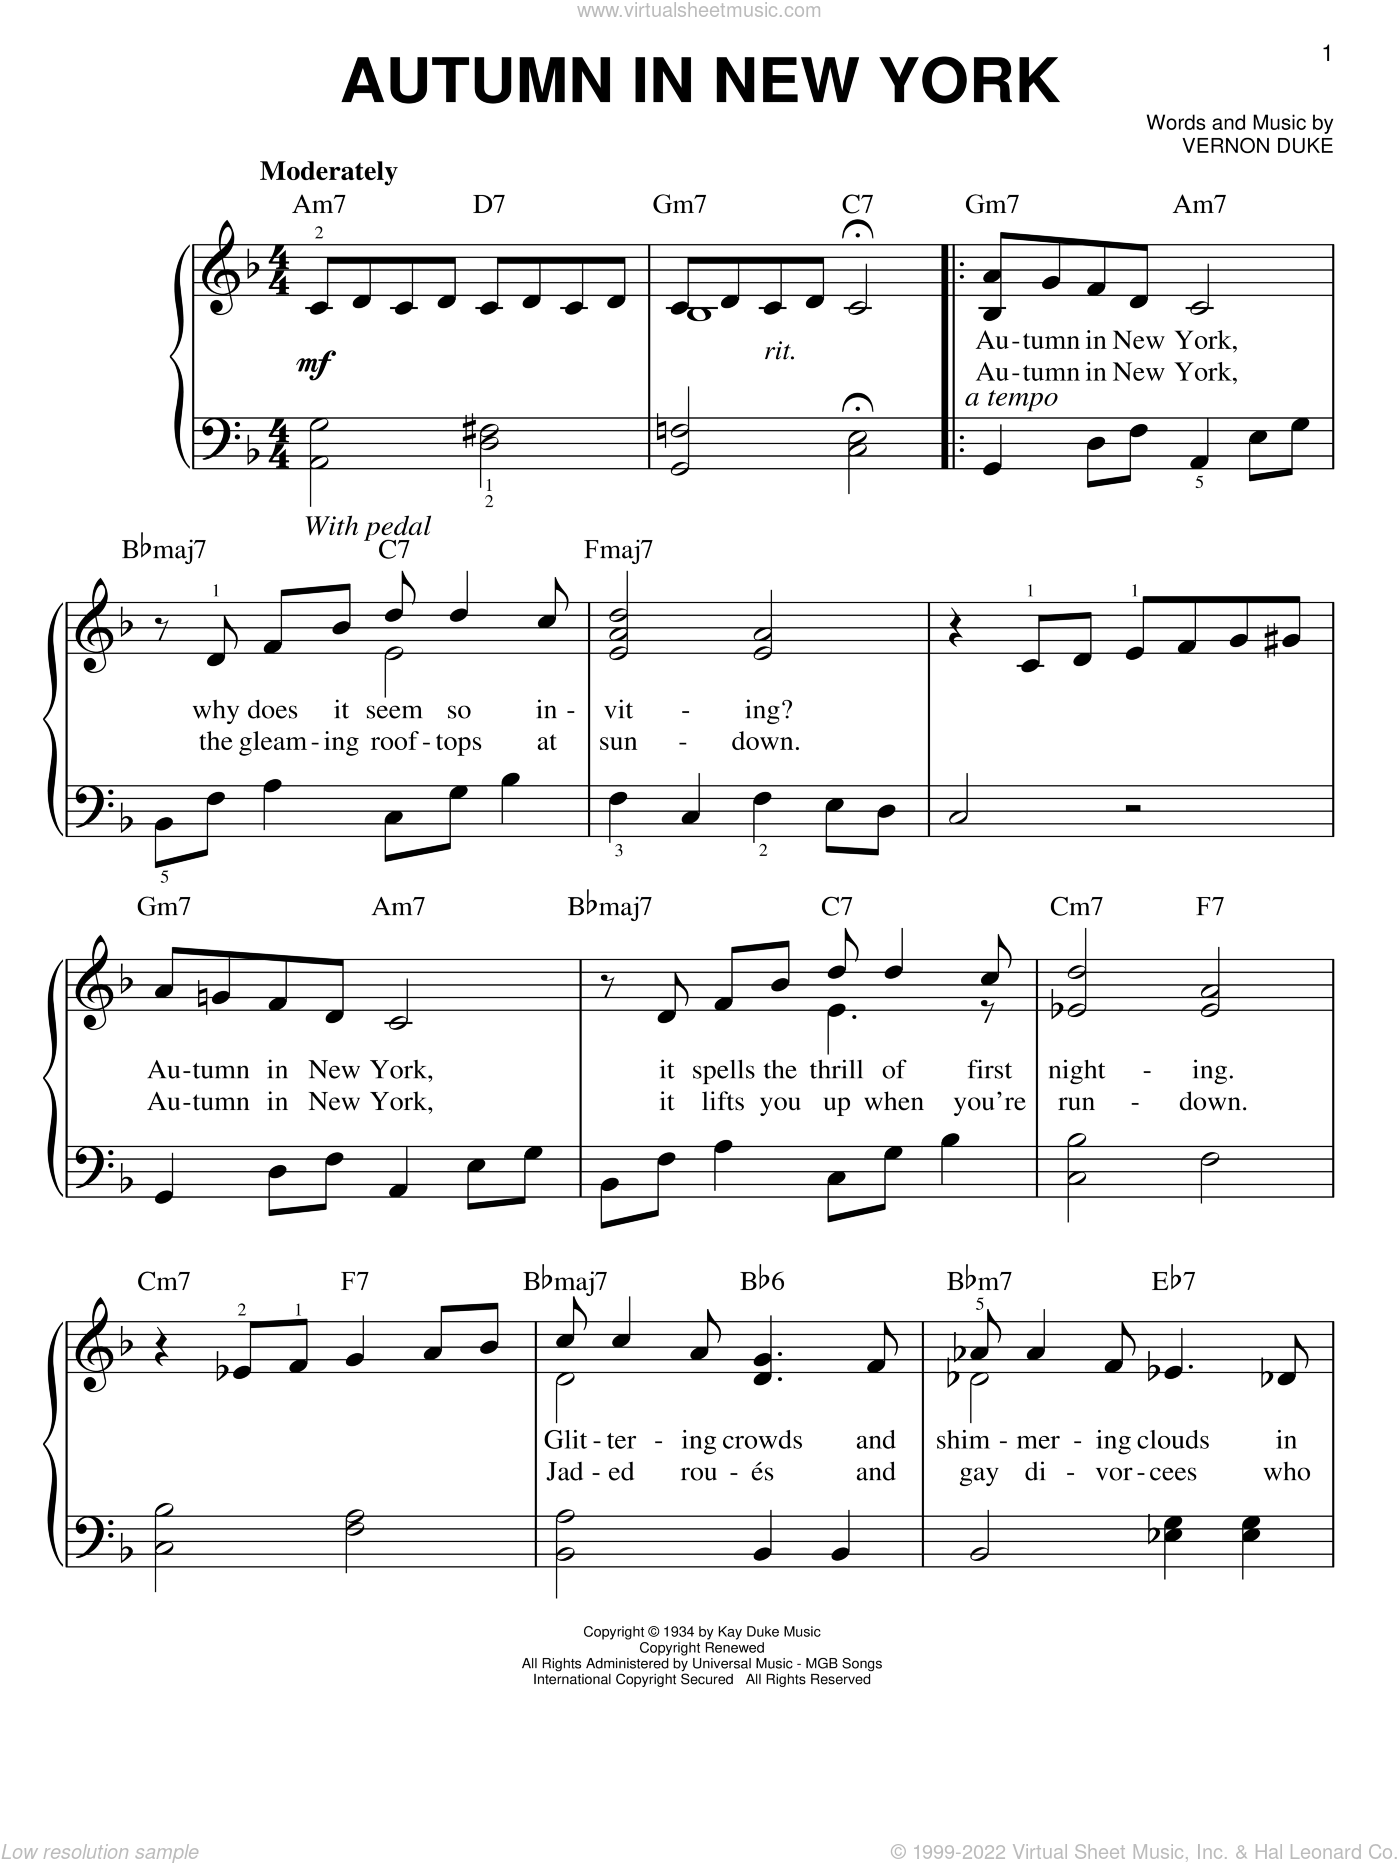 Strangers In The Night, (easy) sheet music for piano solo (PDF)